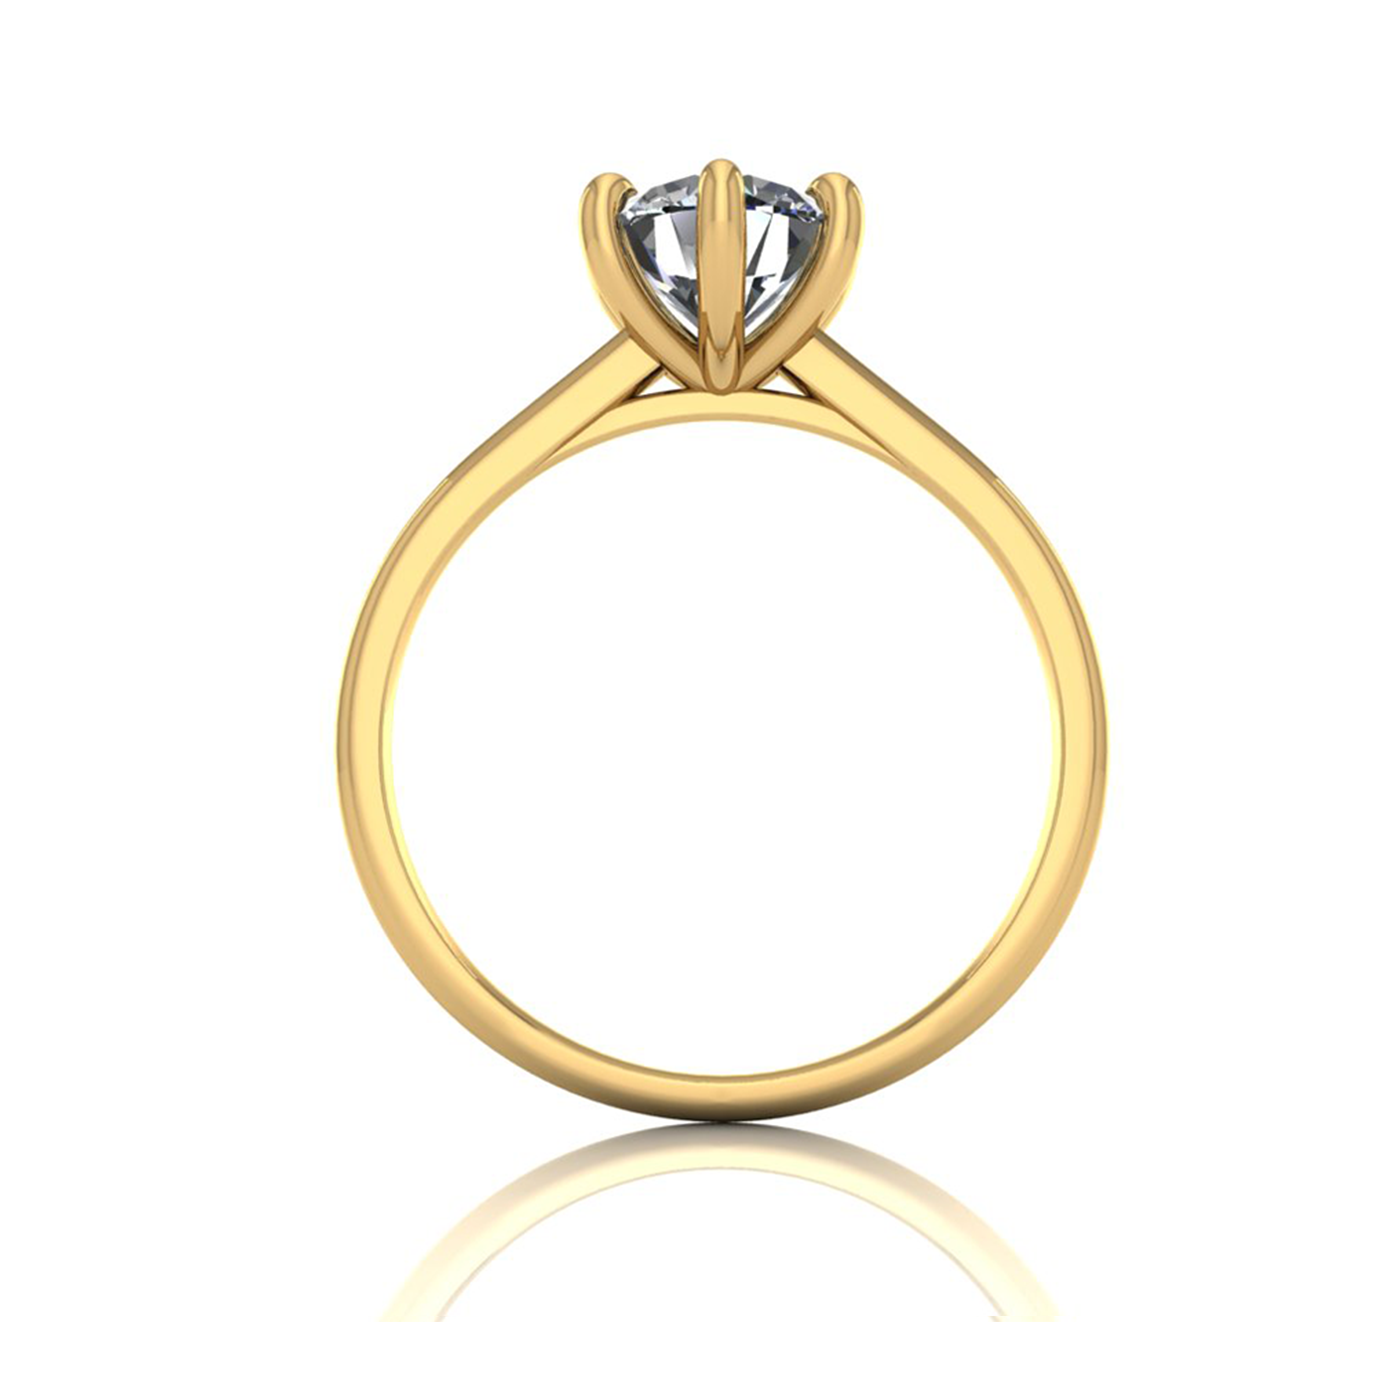 18k yellow gold 1,00 ct 6 prongs solitaire round cut diamond engagement ring with whisper thin band